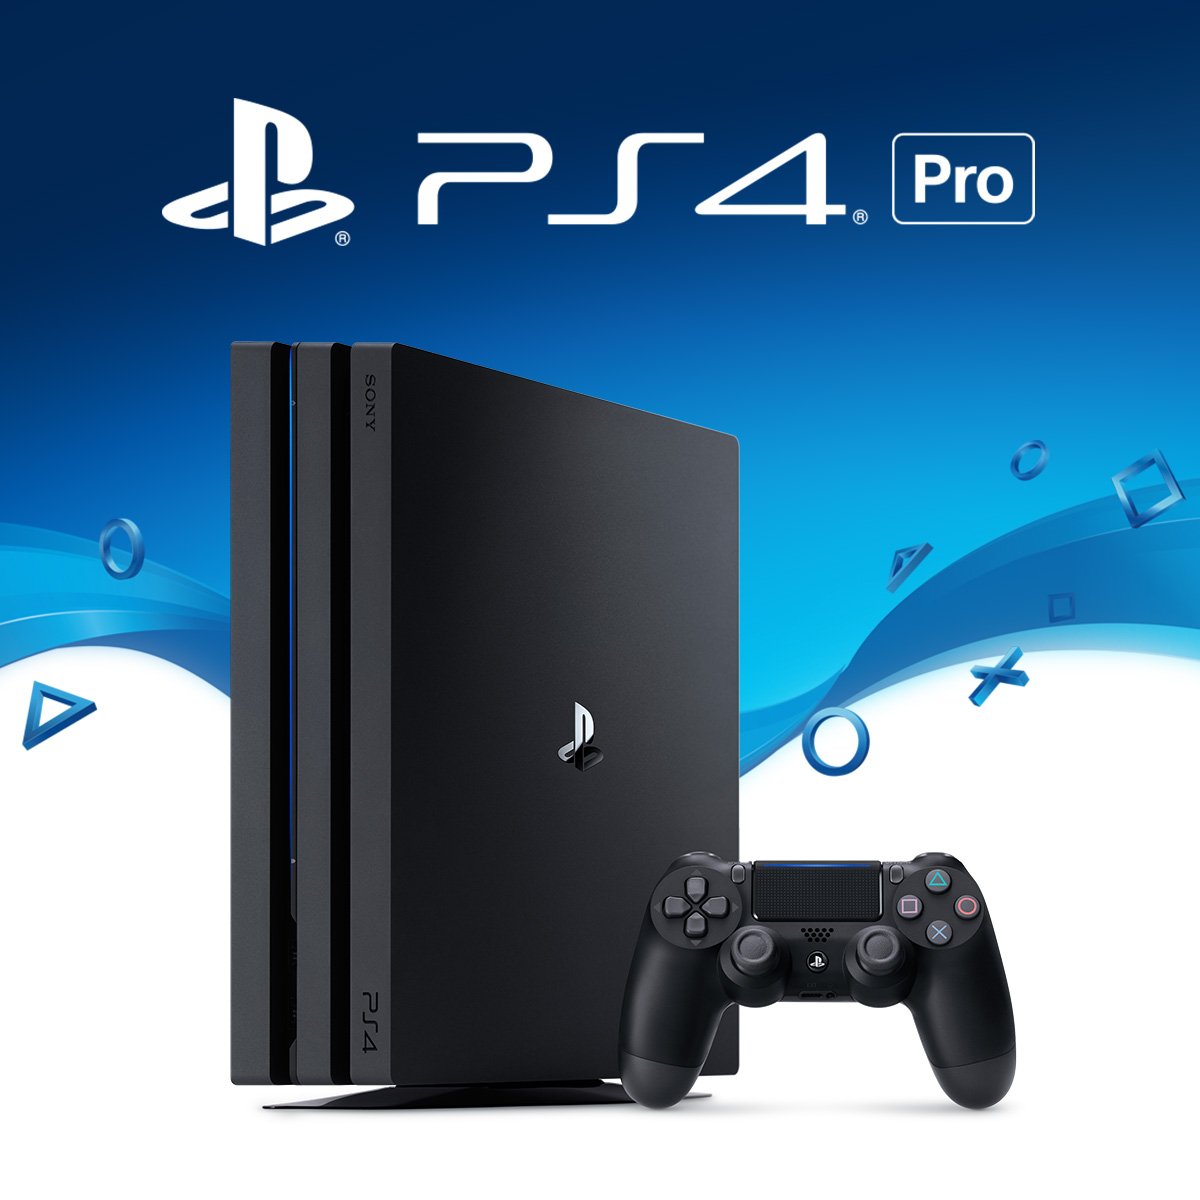 PlayStation Ireland Twitter: new PS4 &amp; PS4 Pro. Get all the here: https://t.co/lvXtWFpuTI https://t.co/Y0CUyTyHBh" / Twitter